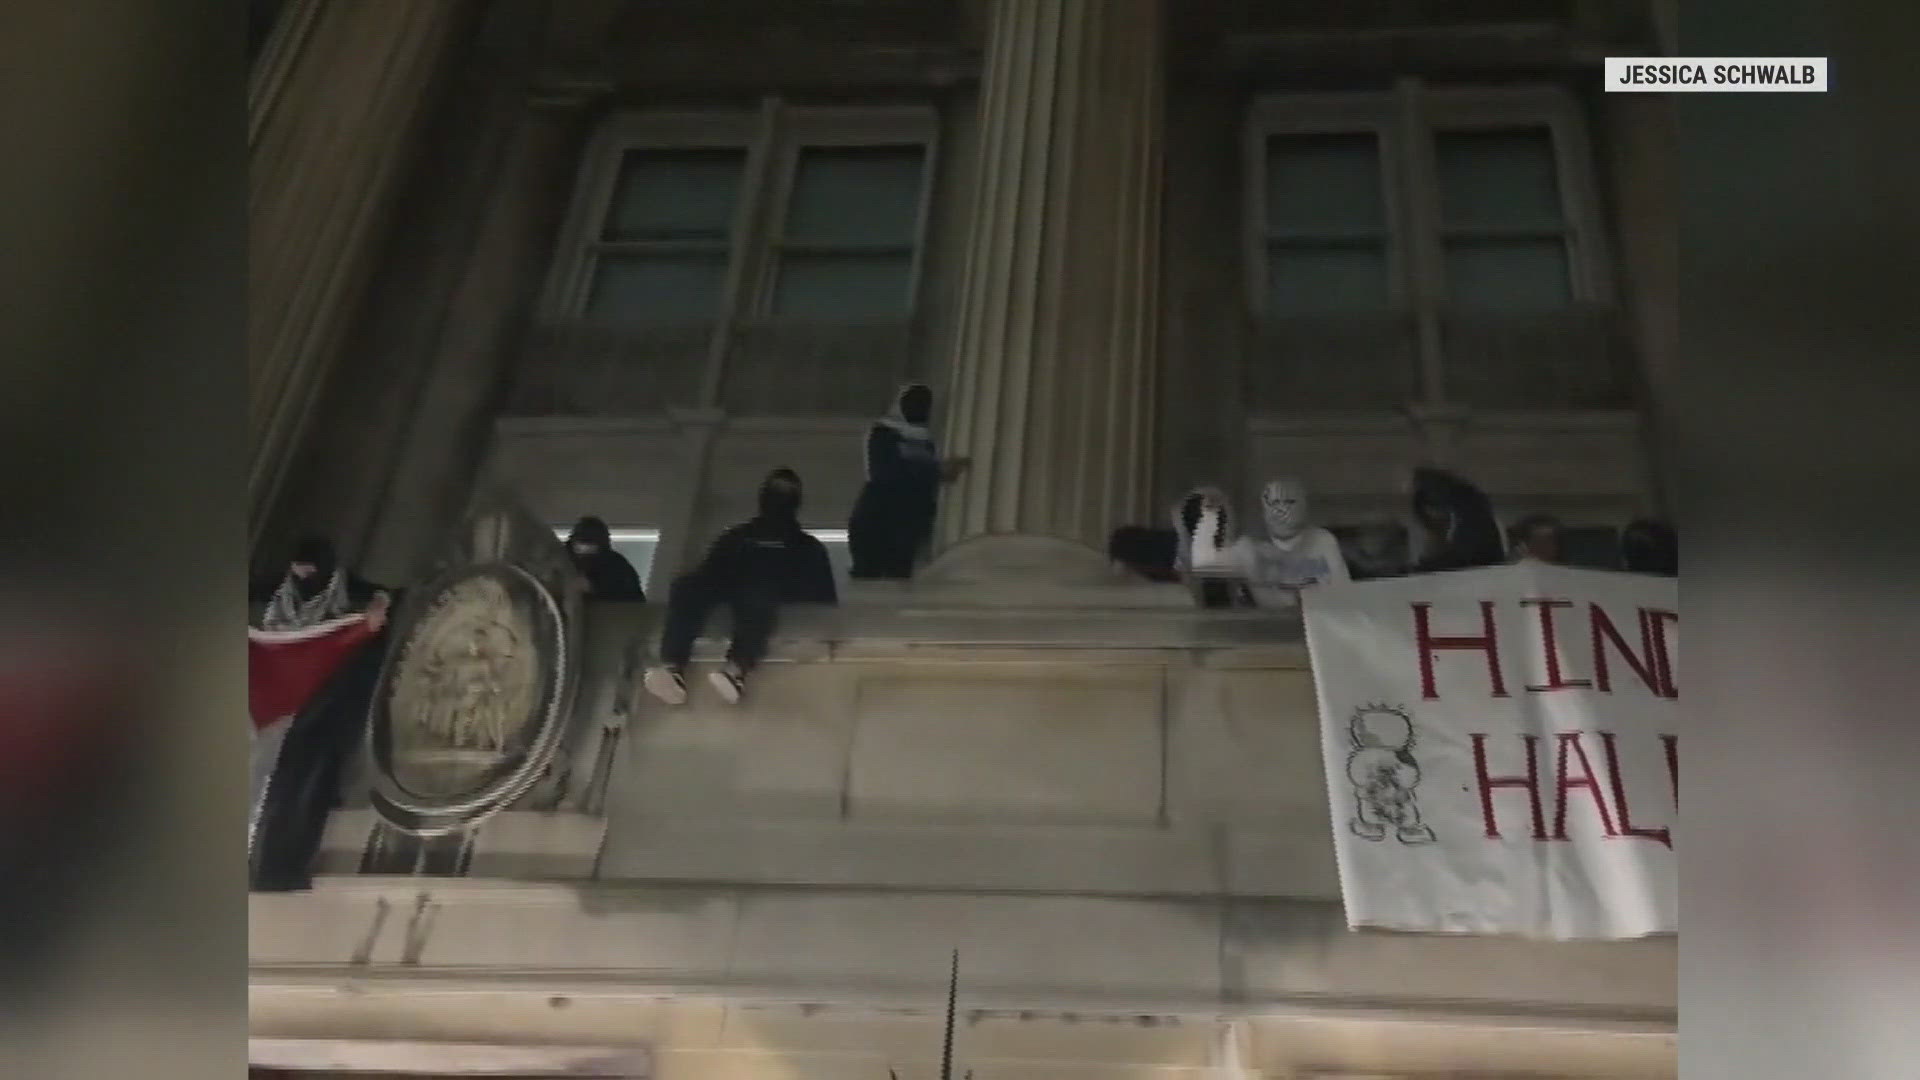 Dozens of protesters took over a building at Columbia University in New York early Tuesday, barricading entrances and unfurling a Palestinian flag from a window.